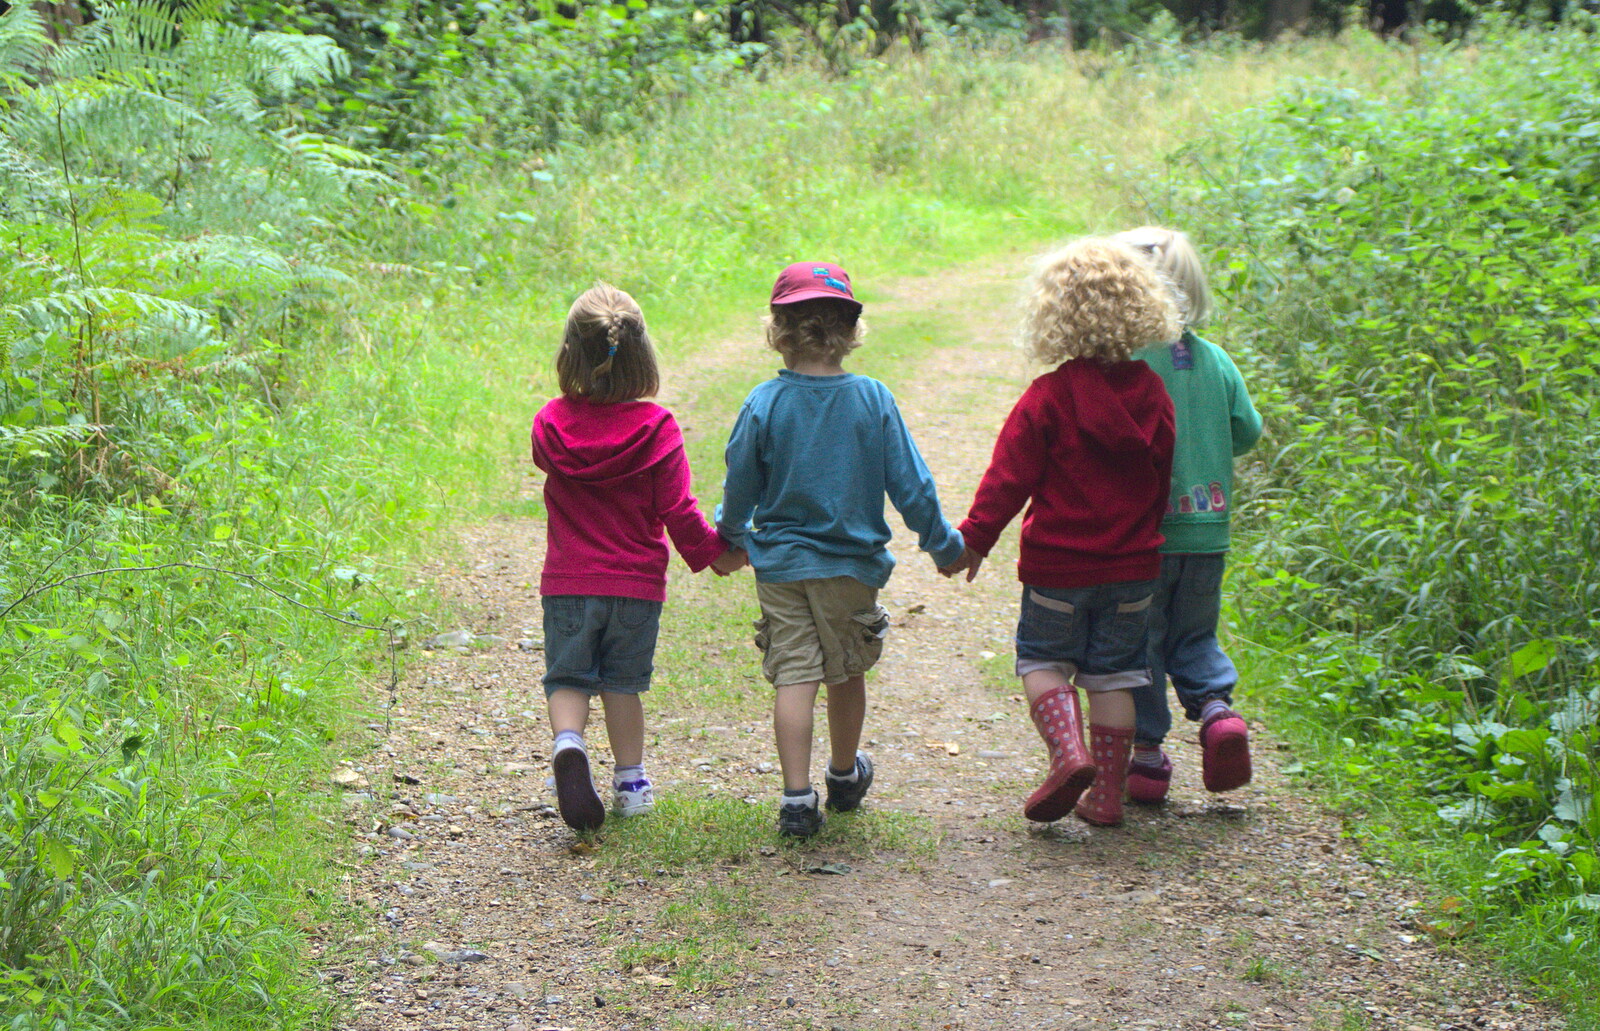 Sophie, Fred, Rosie and Grace walk hand-in-hand from Camping at Dower House, West Harling, Norfolk - 1st September 2012